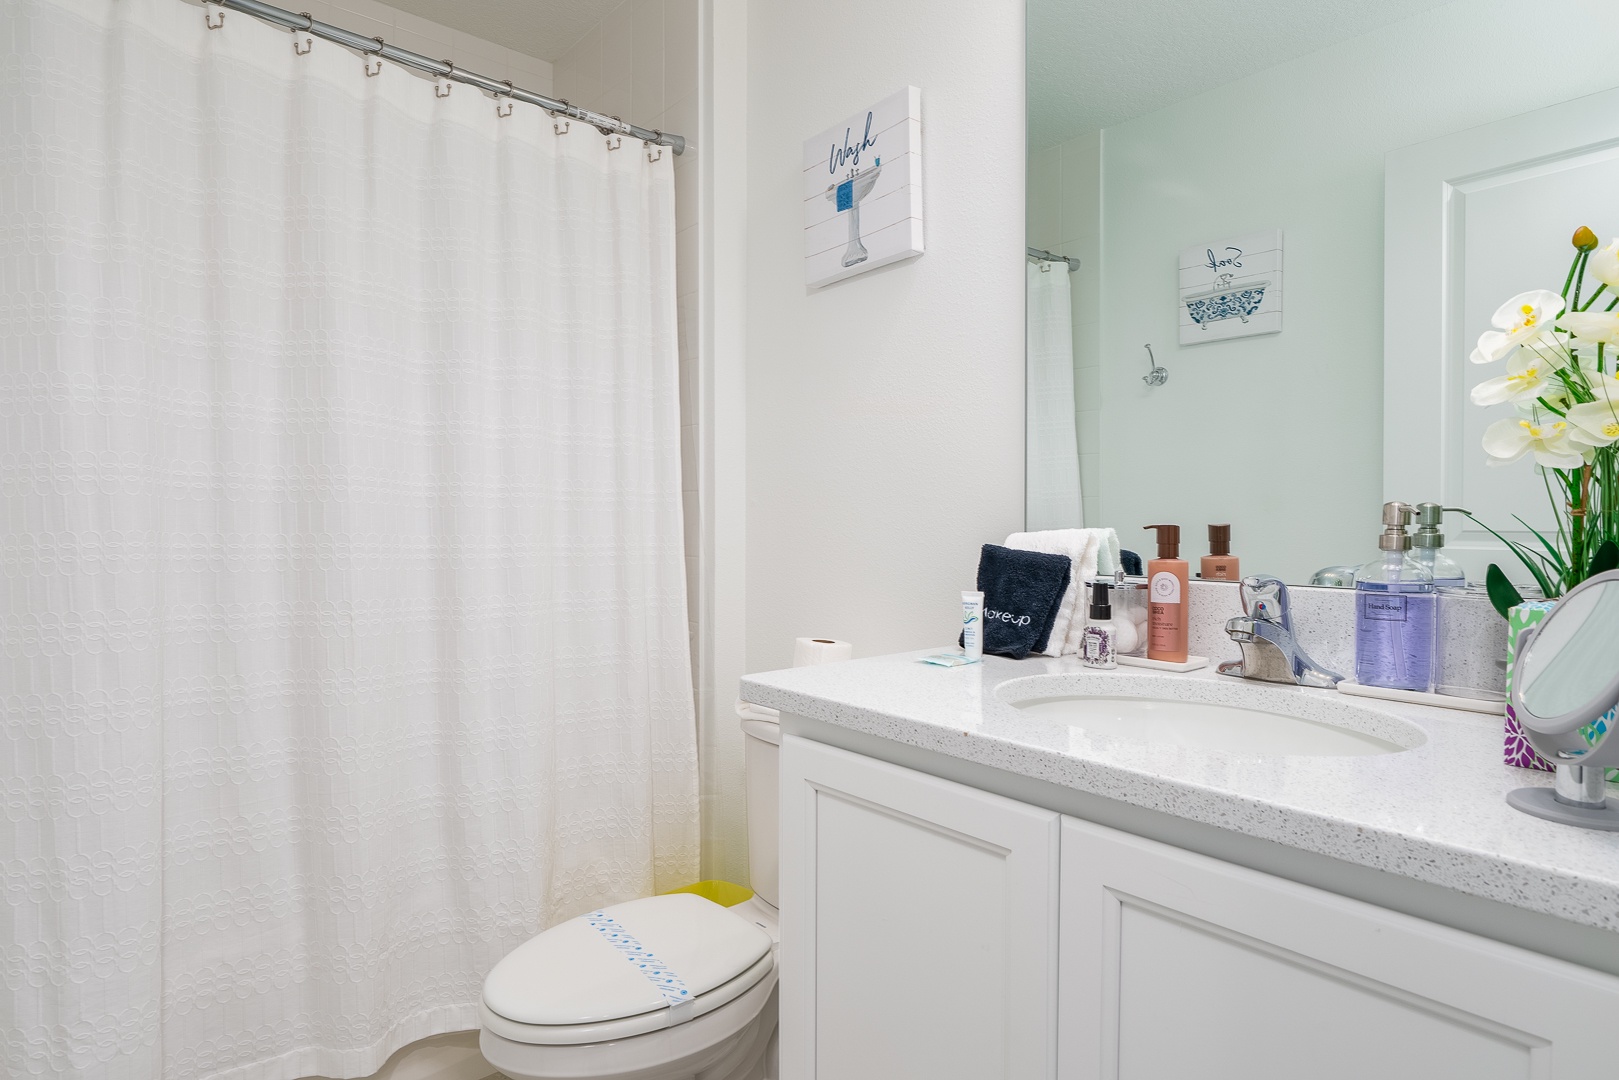 The shared second floor full bath offers a single vanity & shower/tub combo